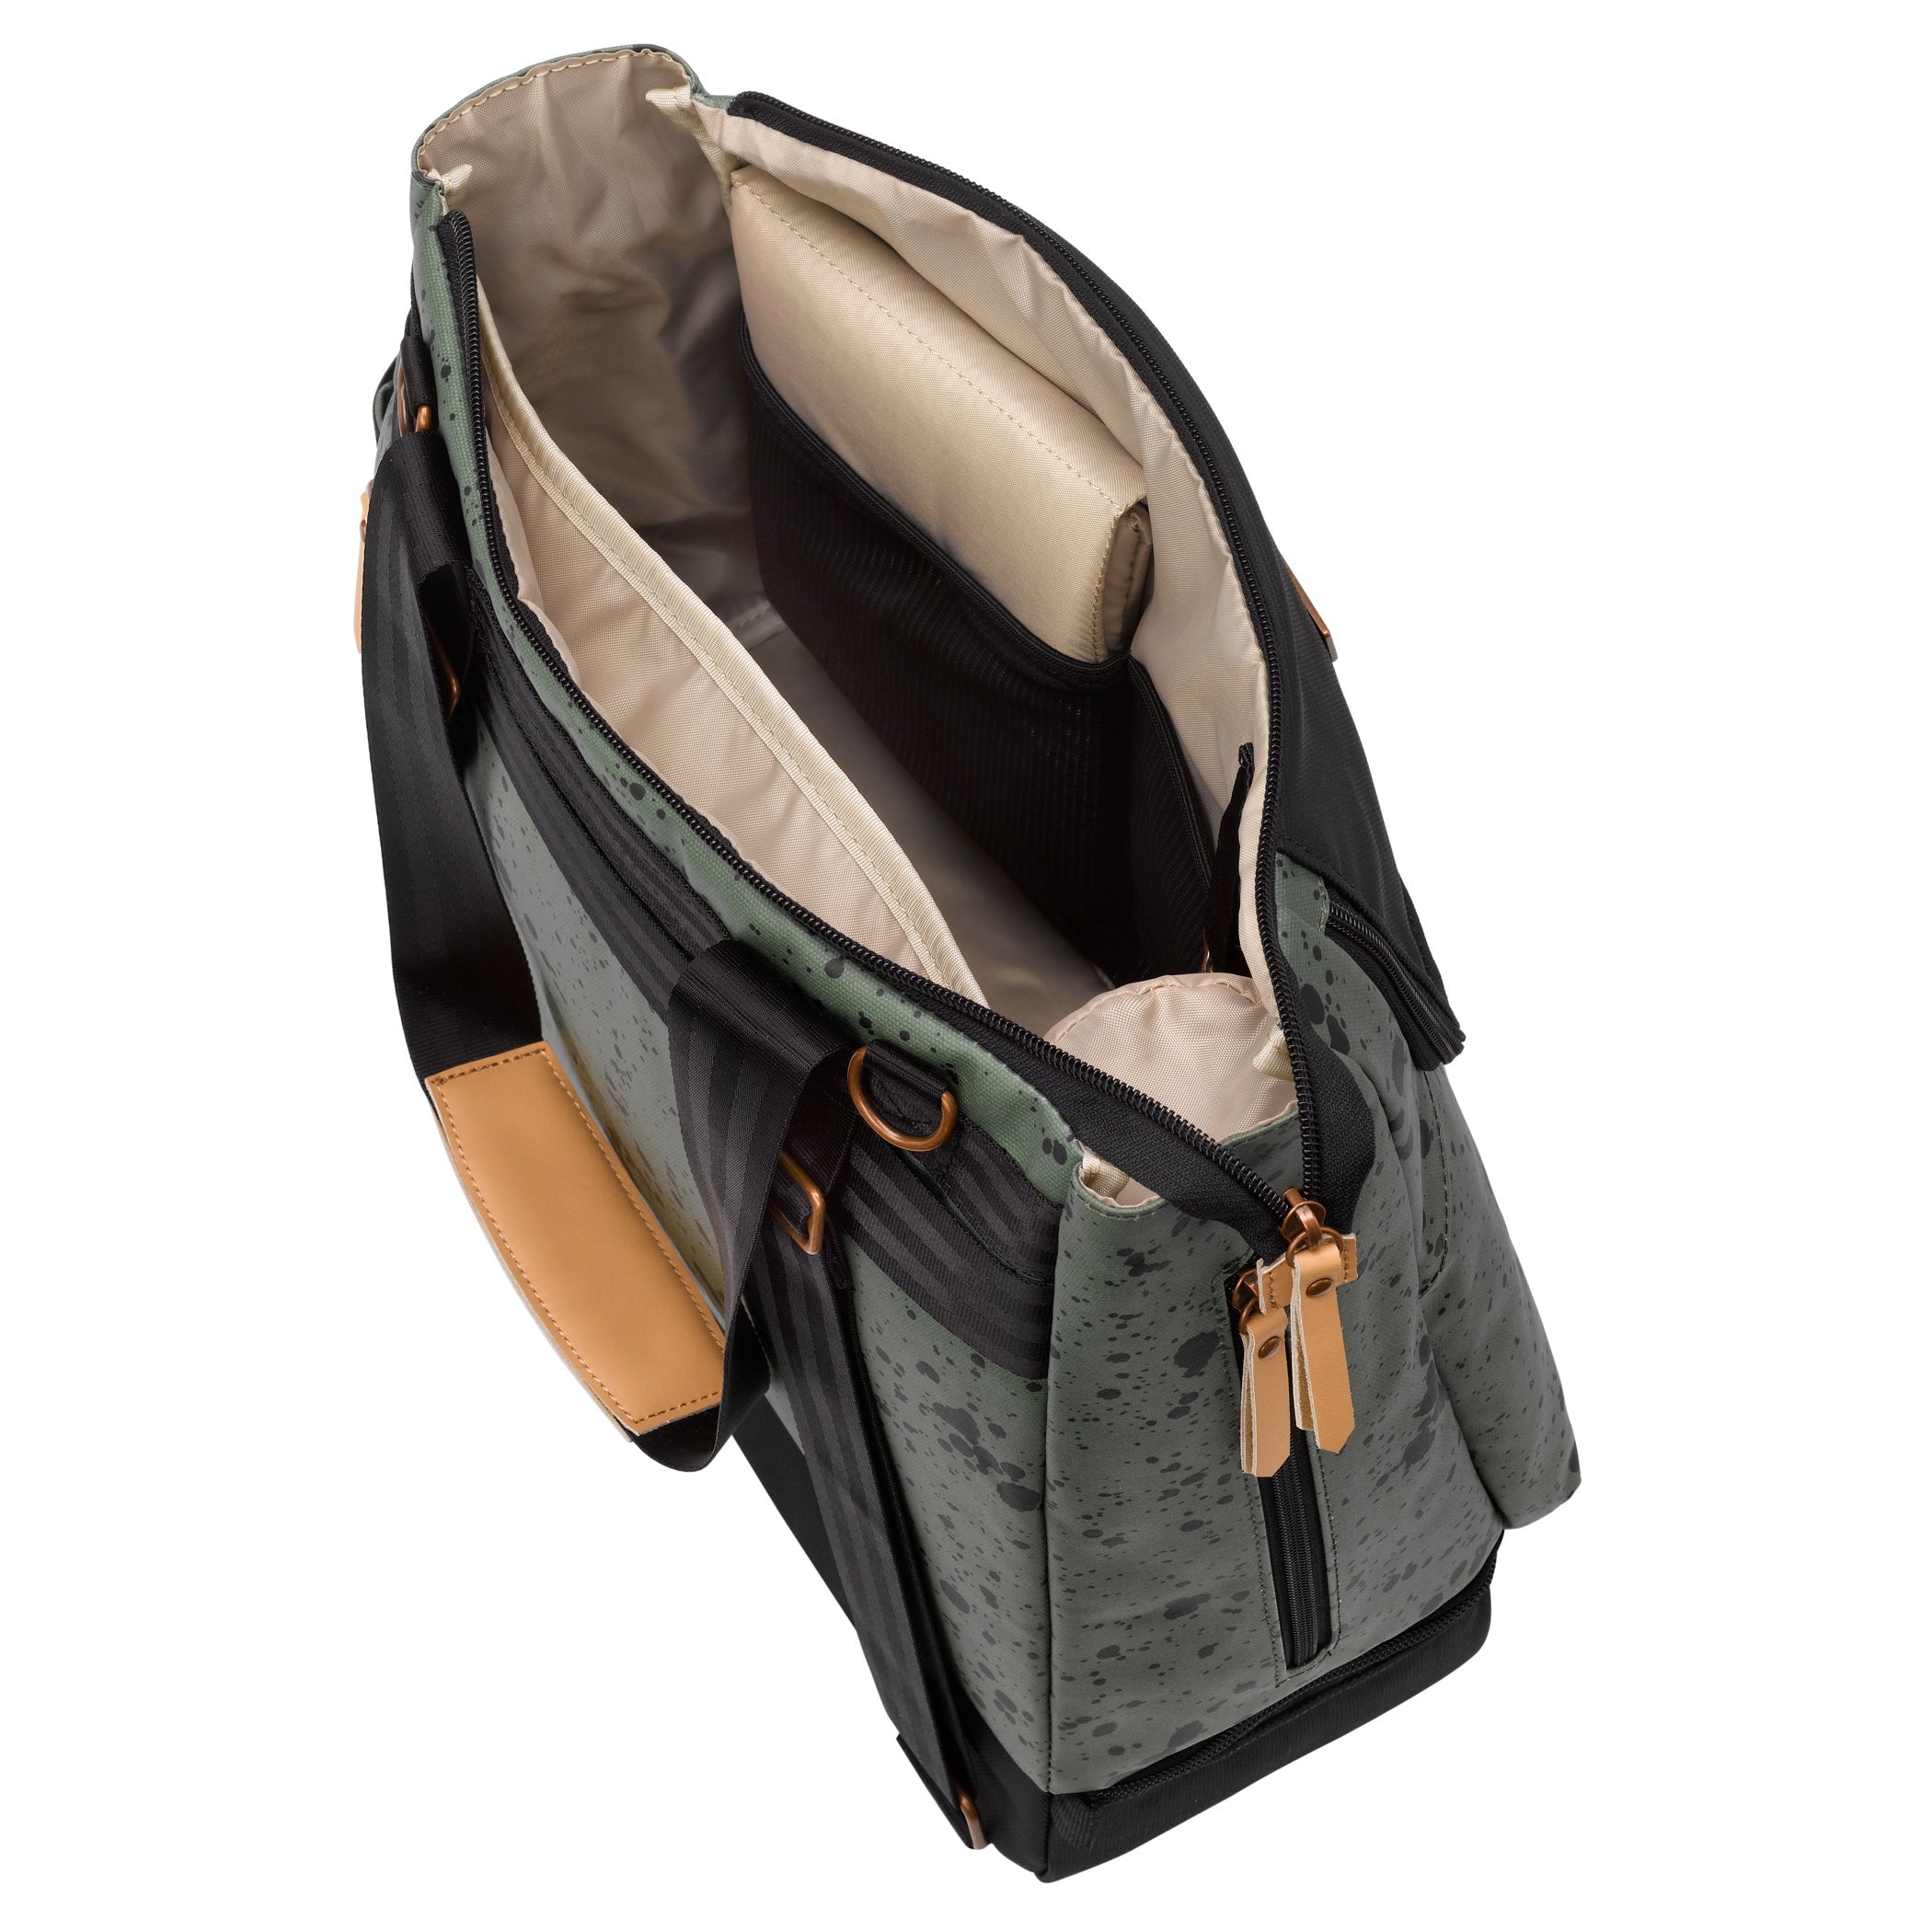 Petunia Pickle Bottom Convertible Tote Diaper Backpack Pivot Pack in Olive Ink Blot Totes